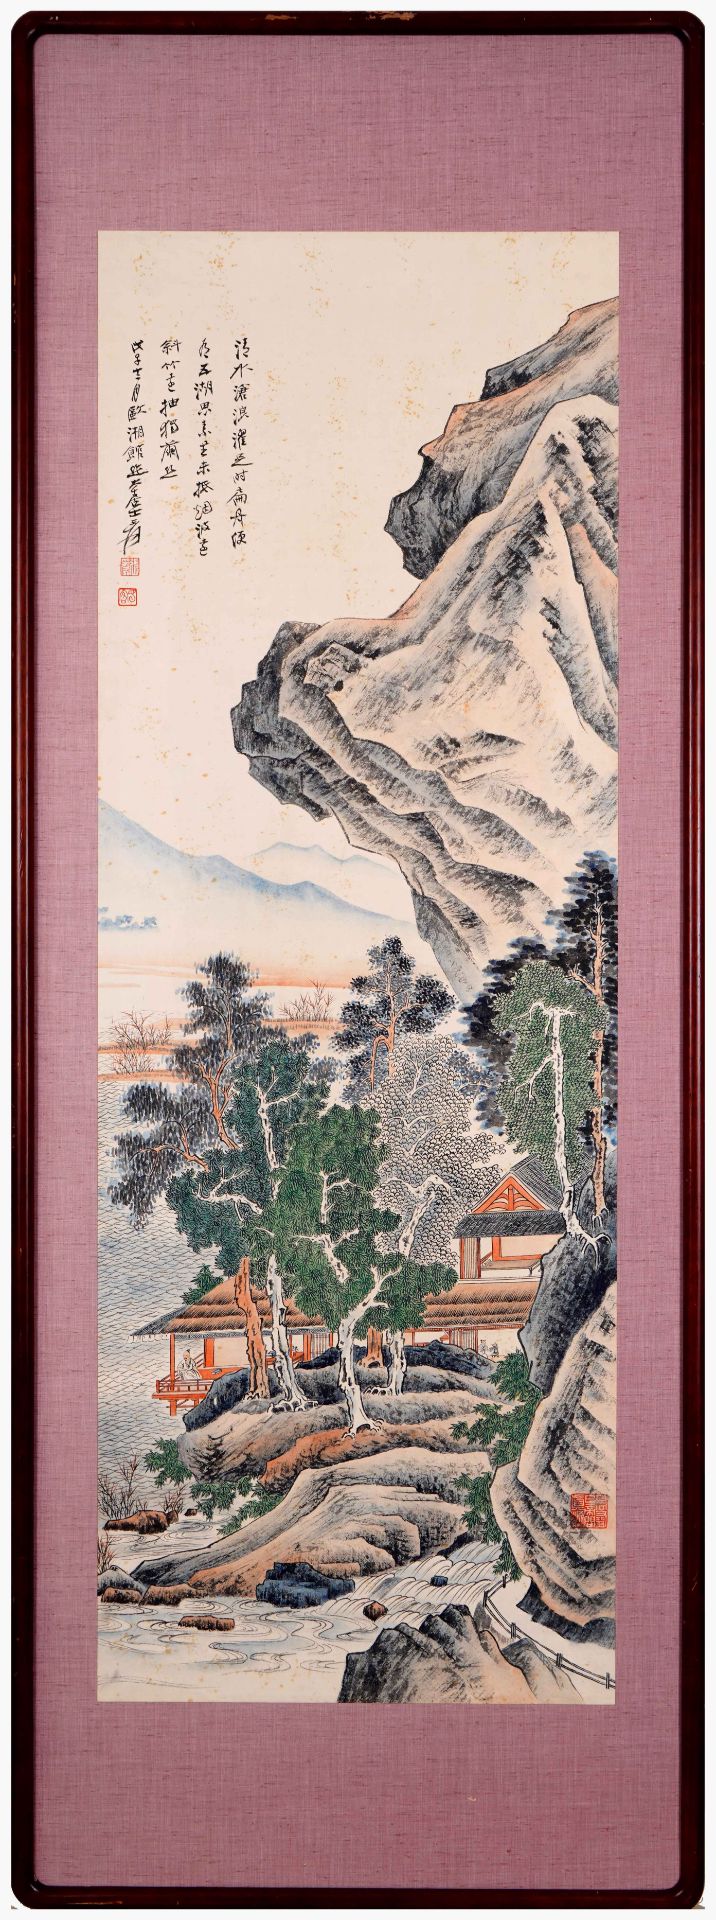 A Chinese Frame Painting By Zhang Daqian